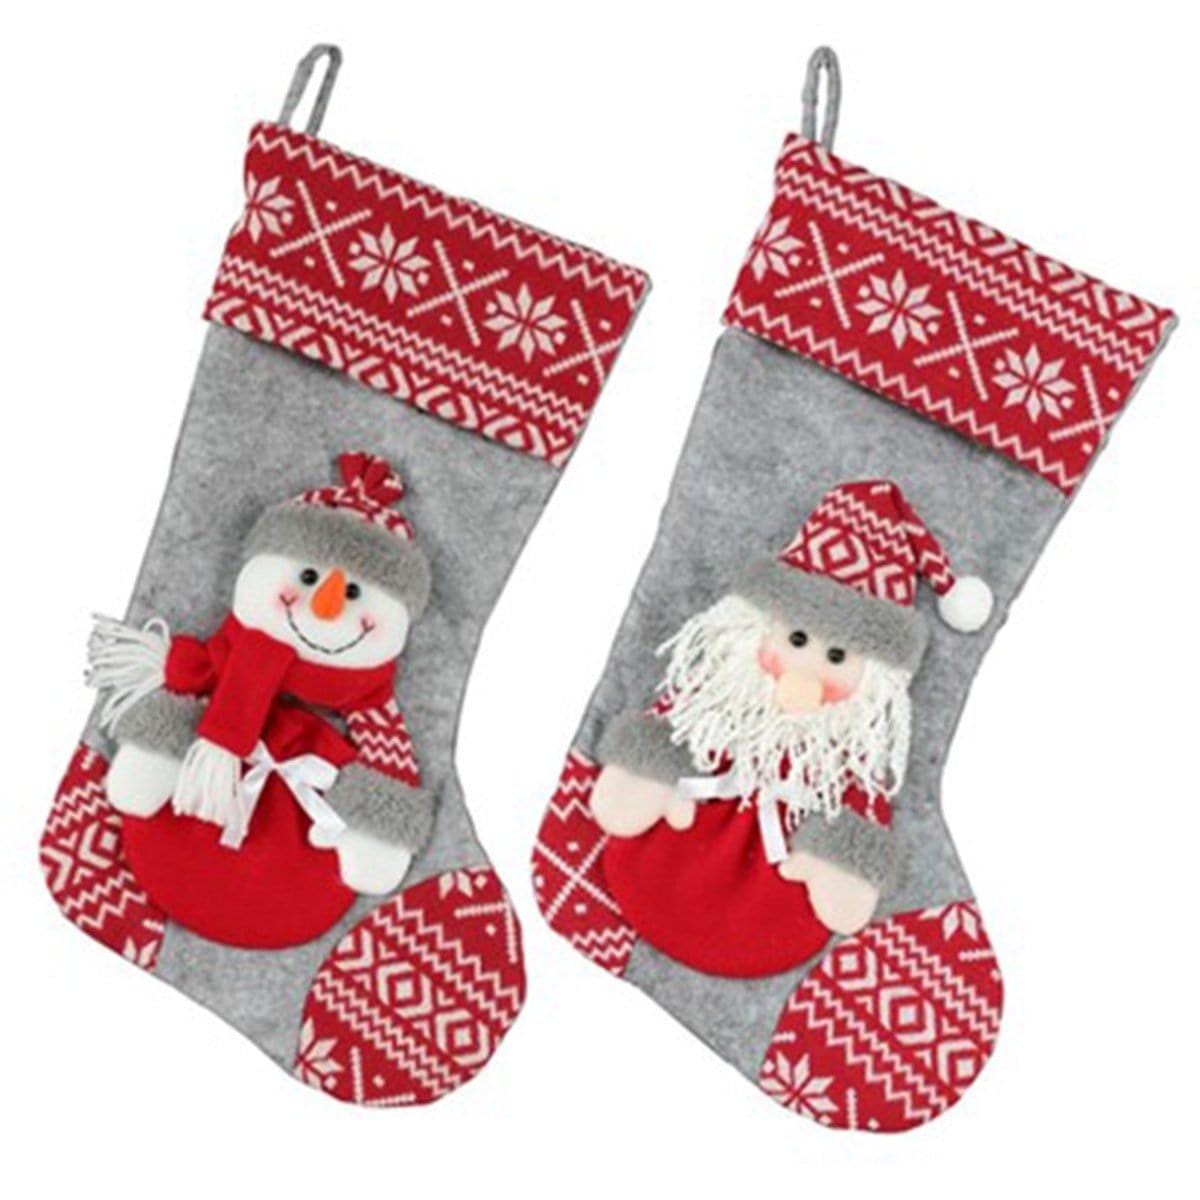 Buy Christmas Character Christmas stockings - Assortment sold at Party Expert